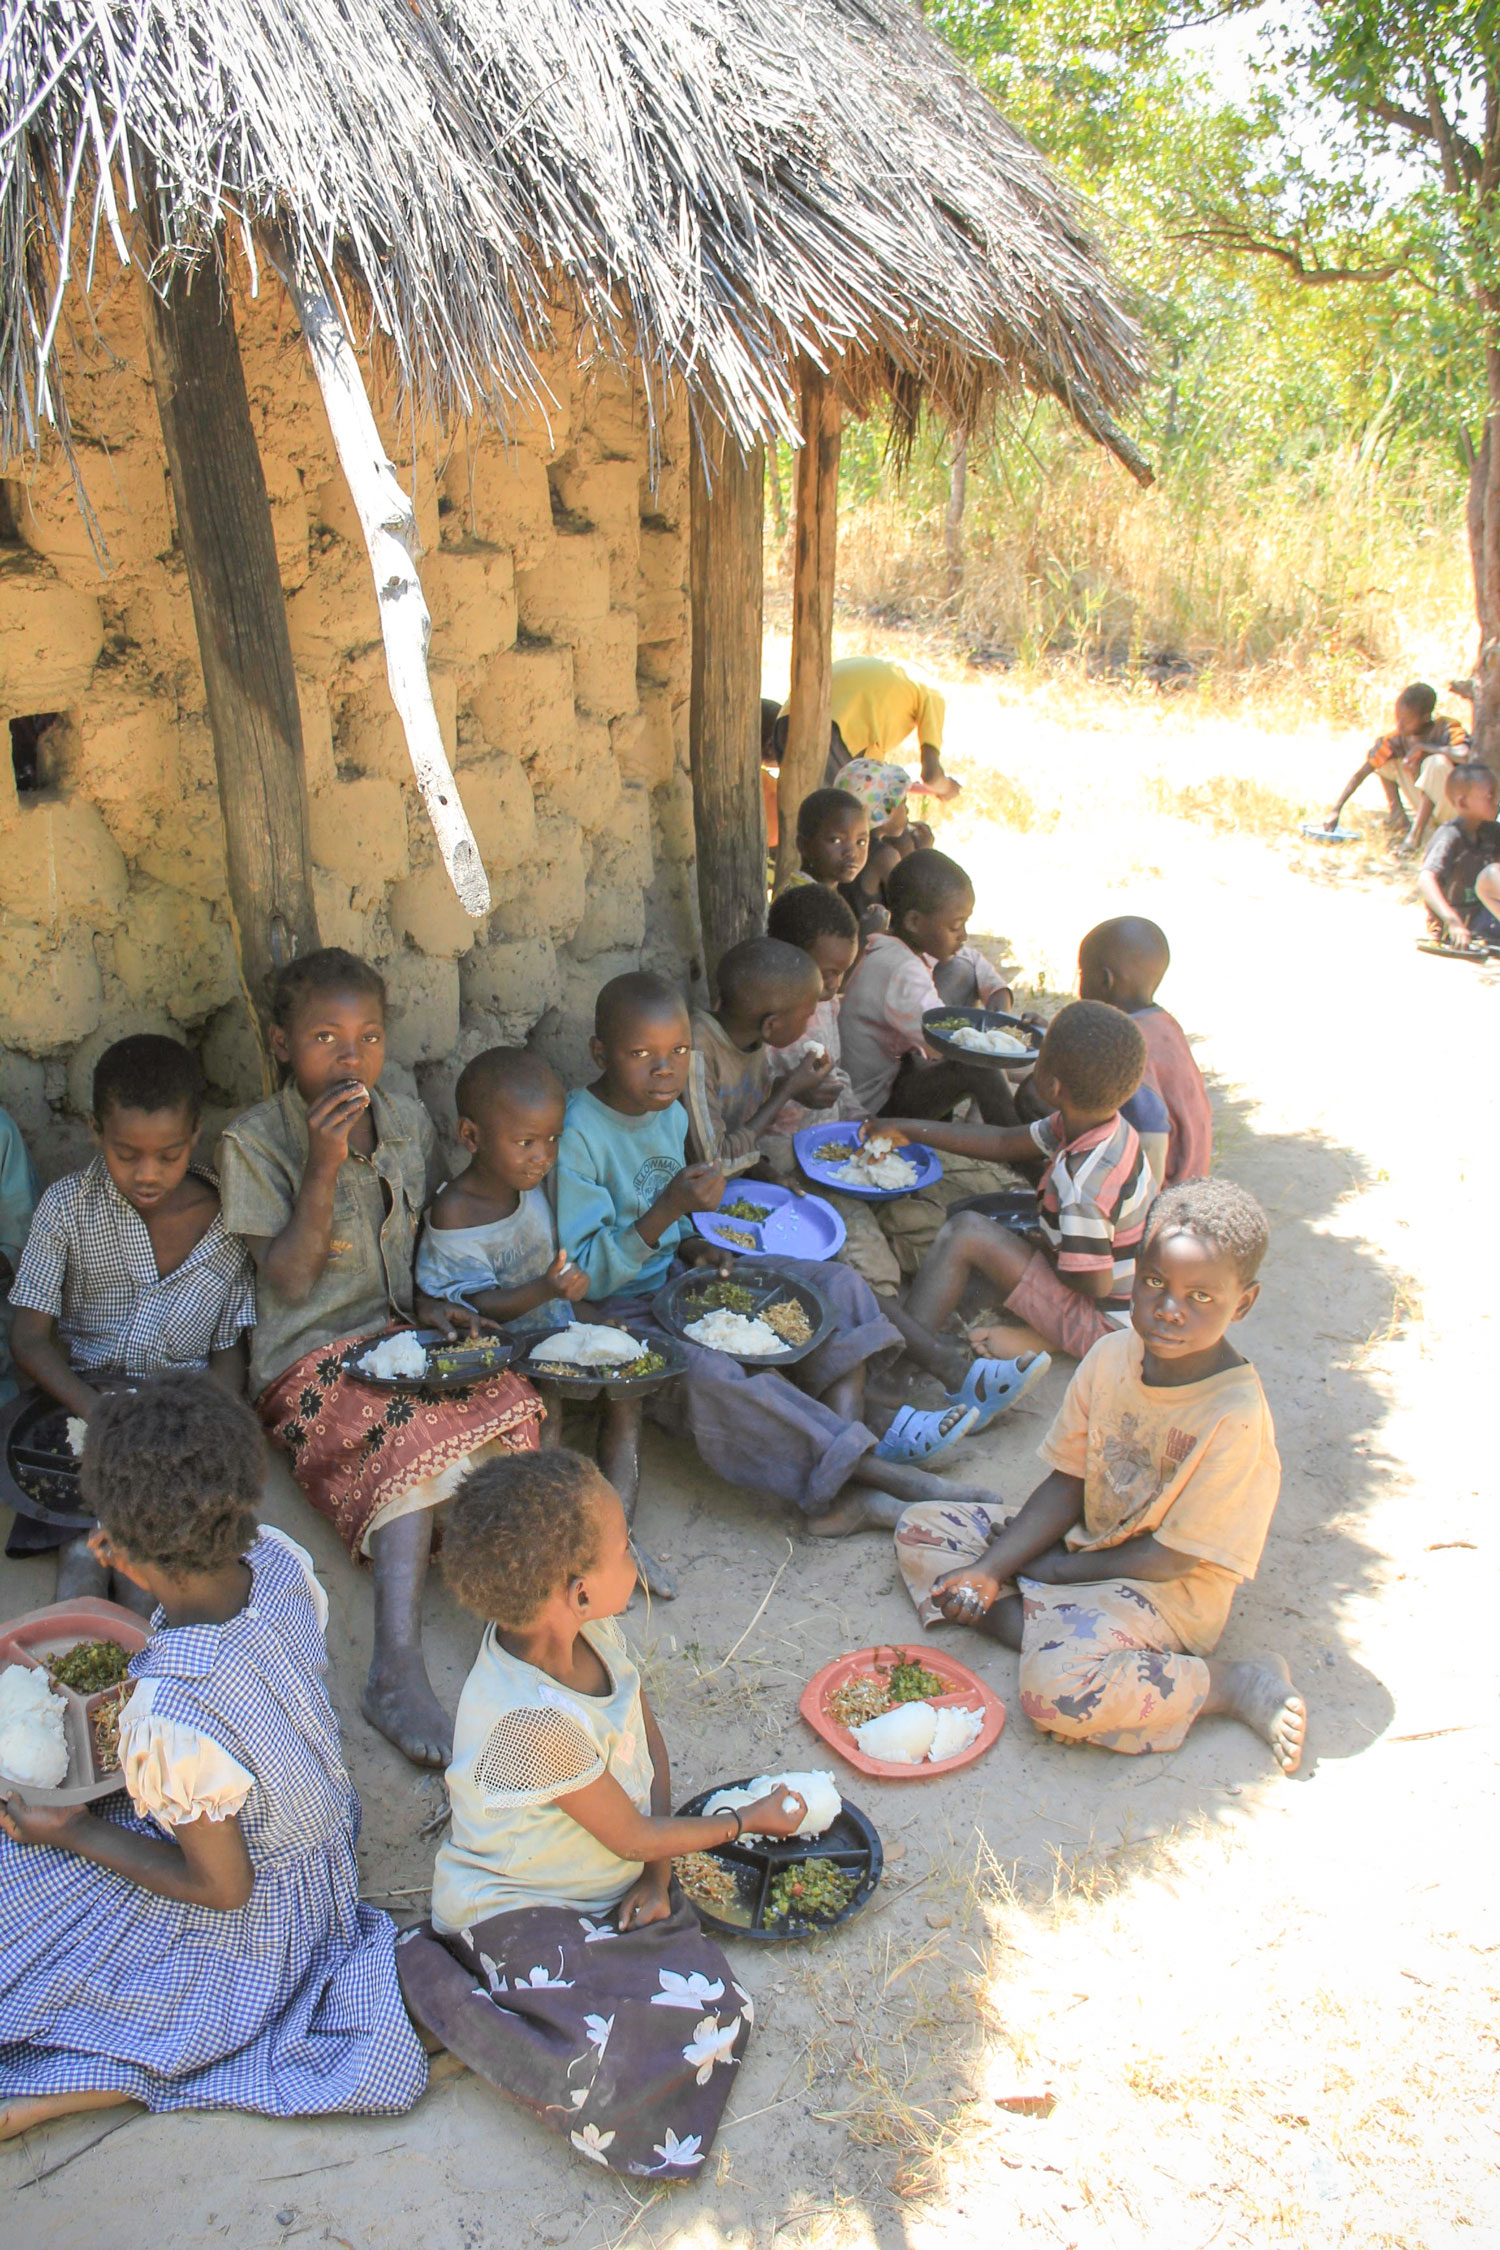  For many of the children in Chibuli, the food that they receive at the Care Point is the only meal that they will receive that day. 